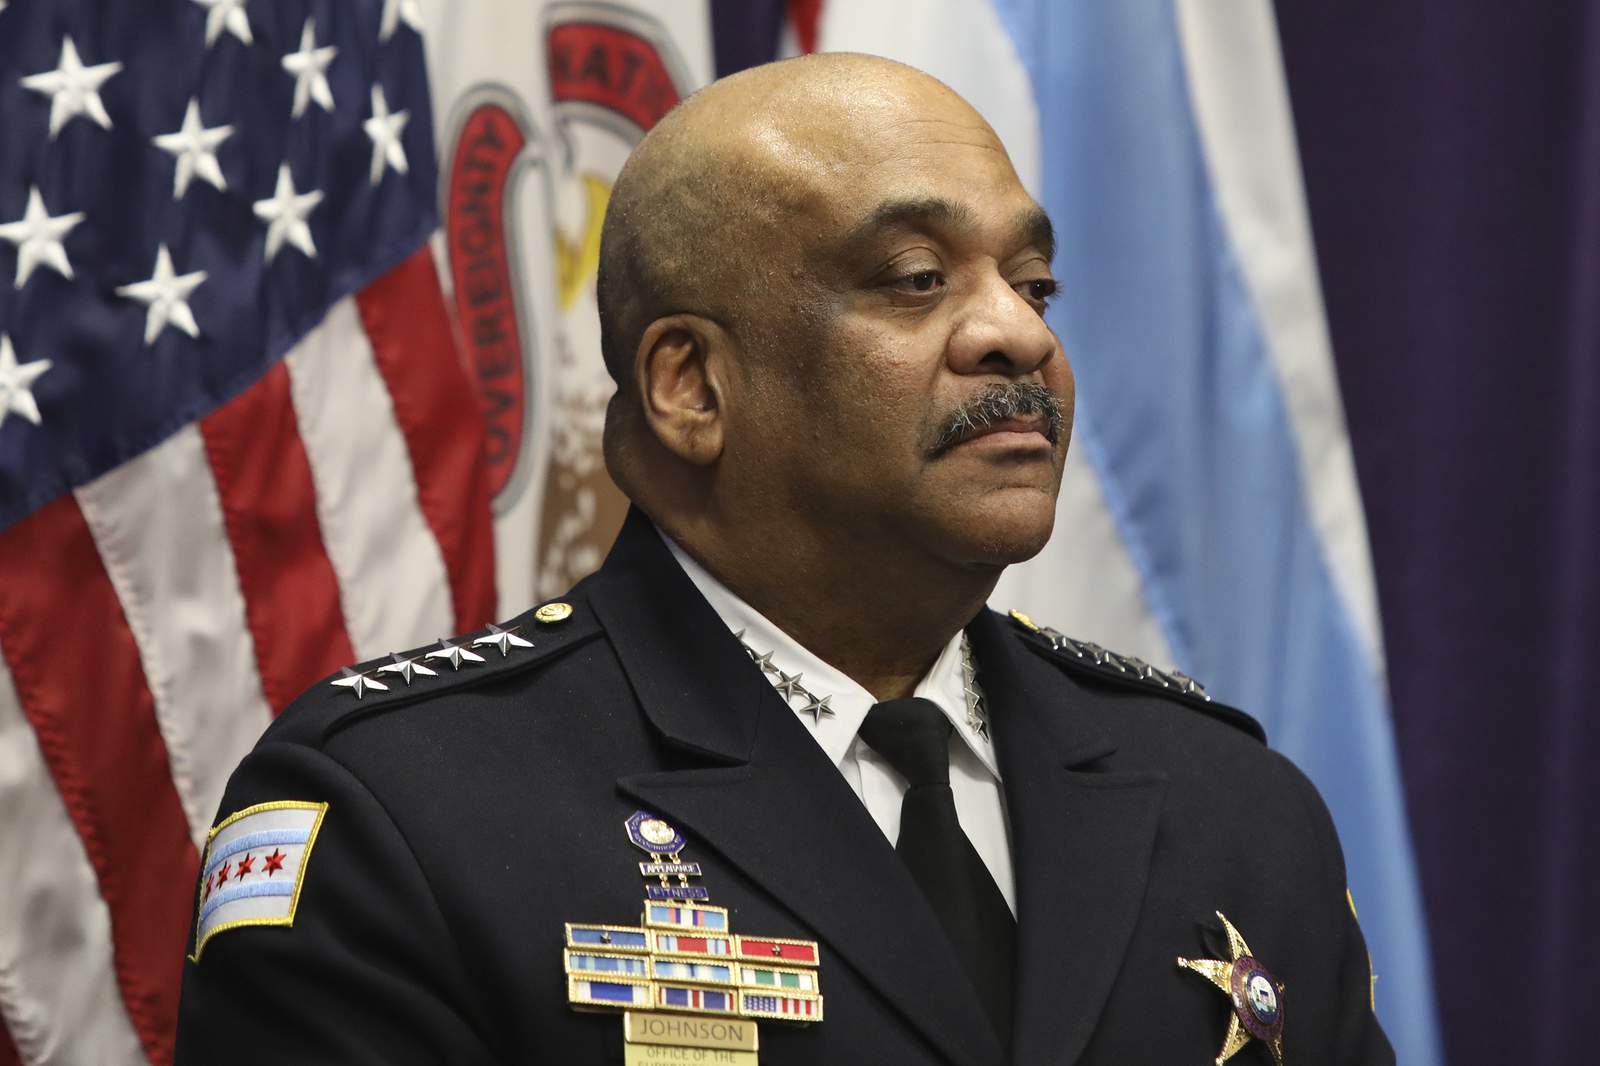 7 Chicago cops suspended for roles in chief's traffic stop